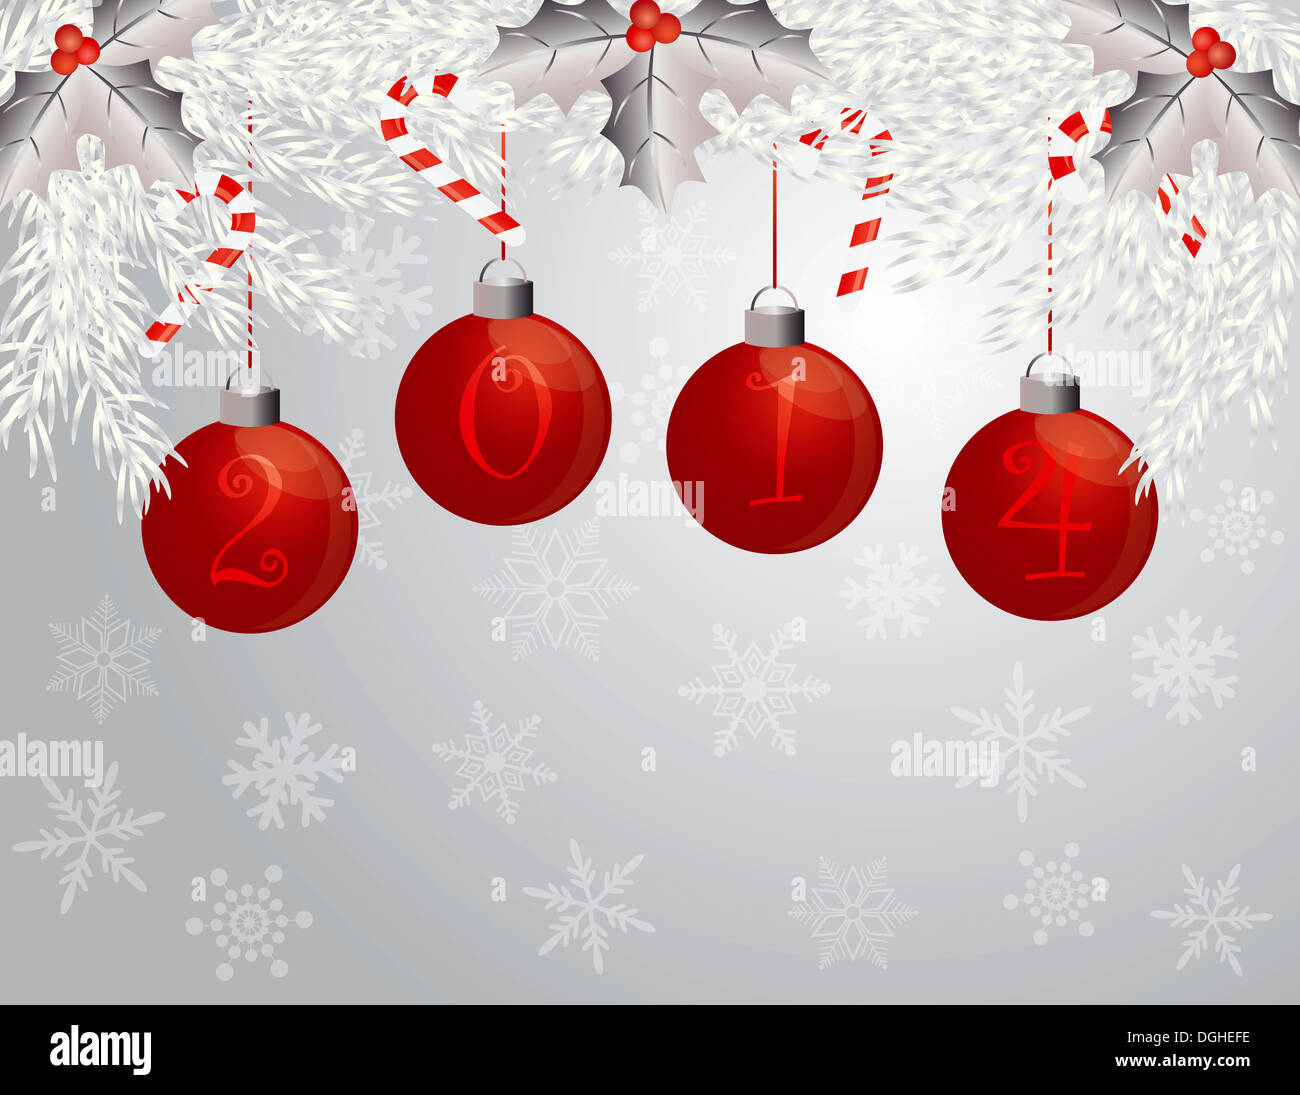 Happy New Year Christmas Garland with 2014 Red Ornaments Silver Holly Berries Leaves and Candy Cane